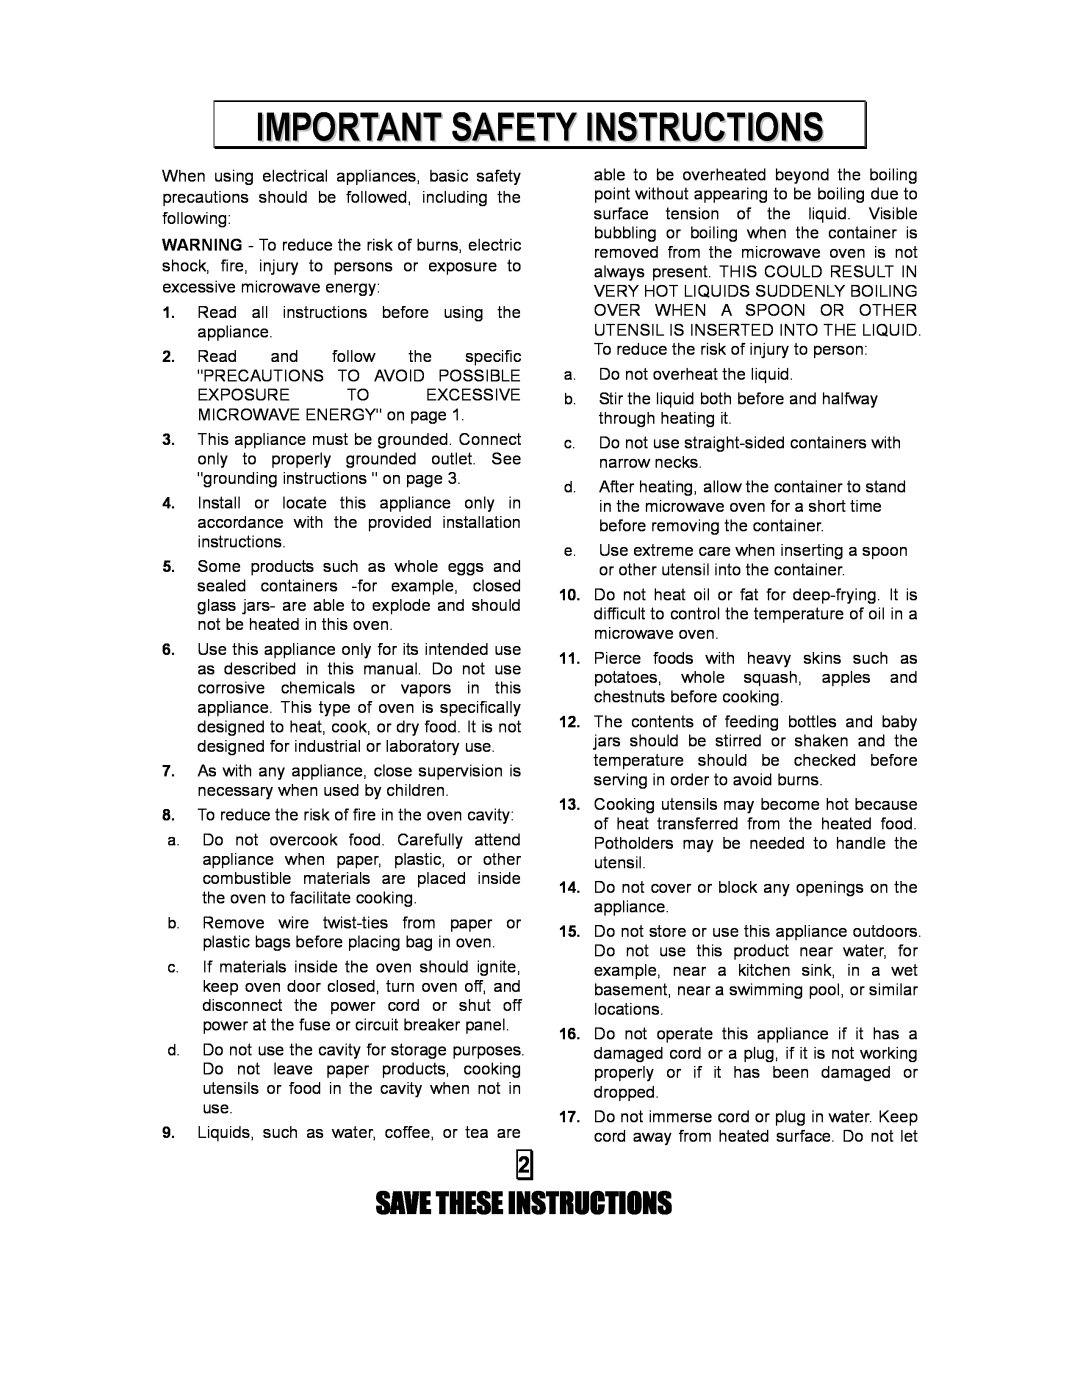 Kenmore 87103 user manual Save These Instructions, Important Safety Instructions 